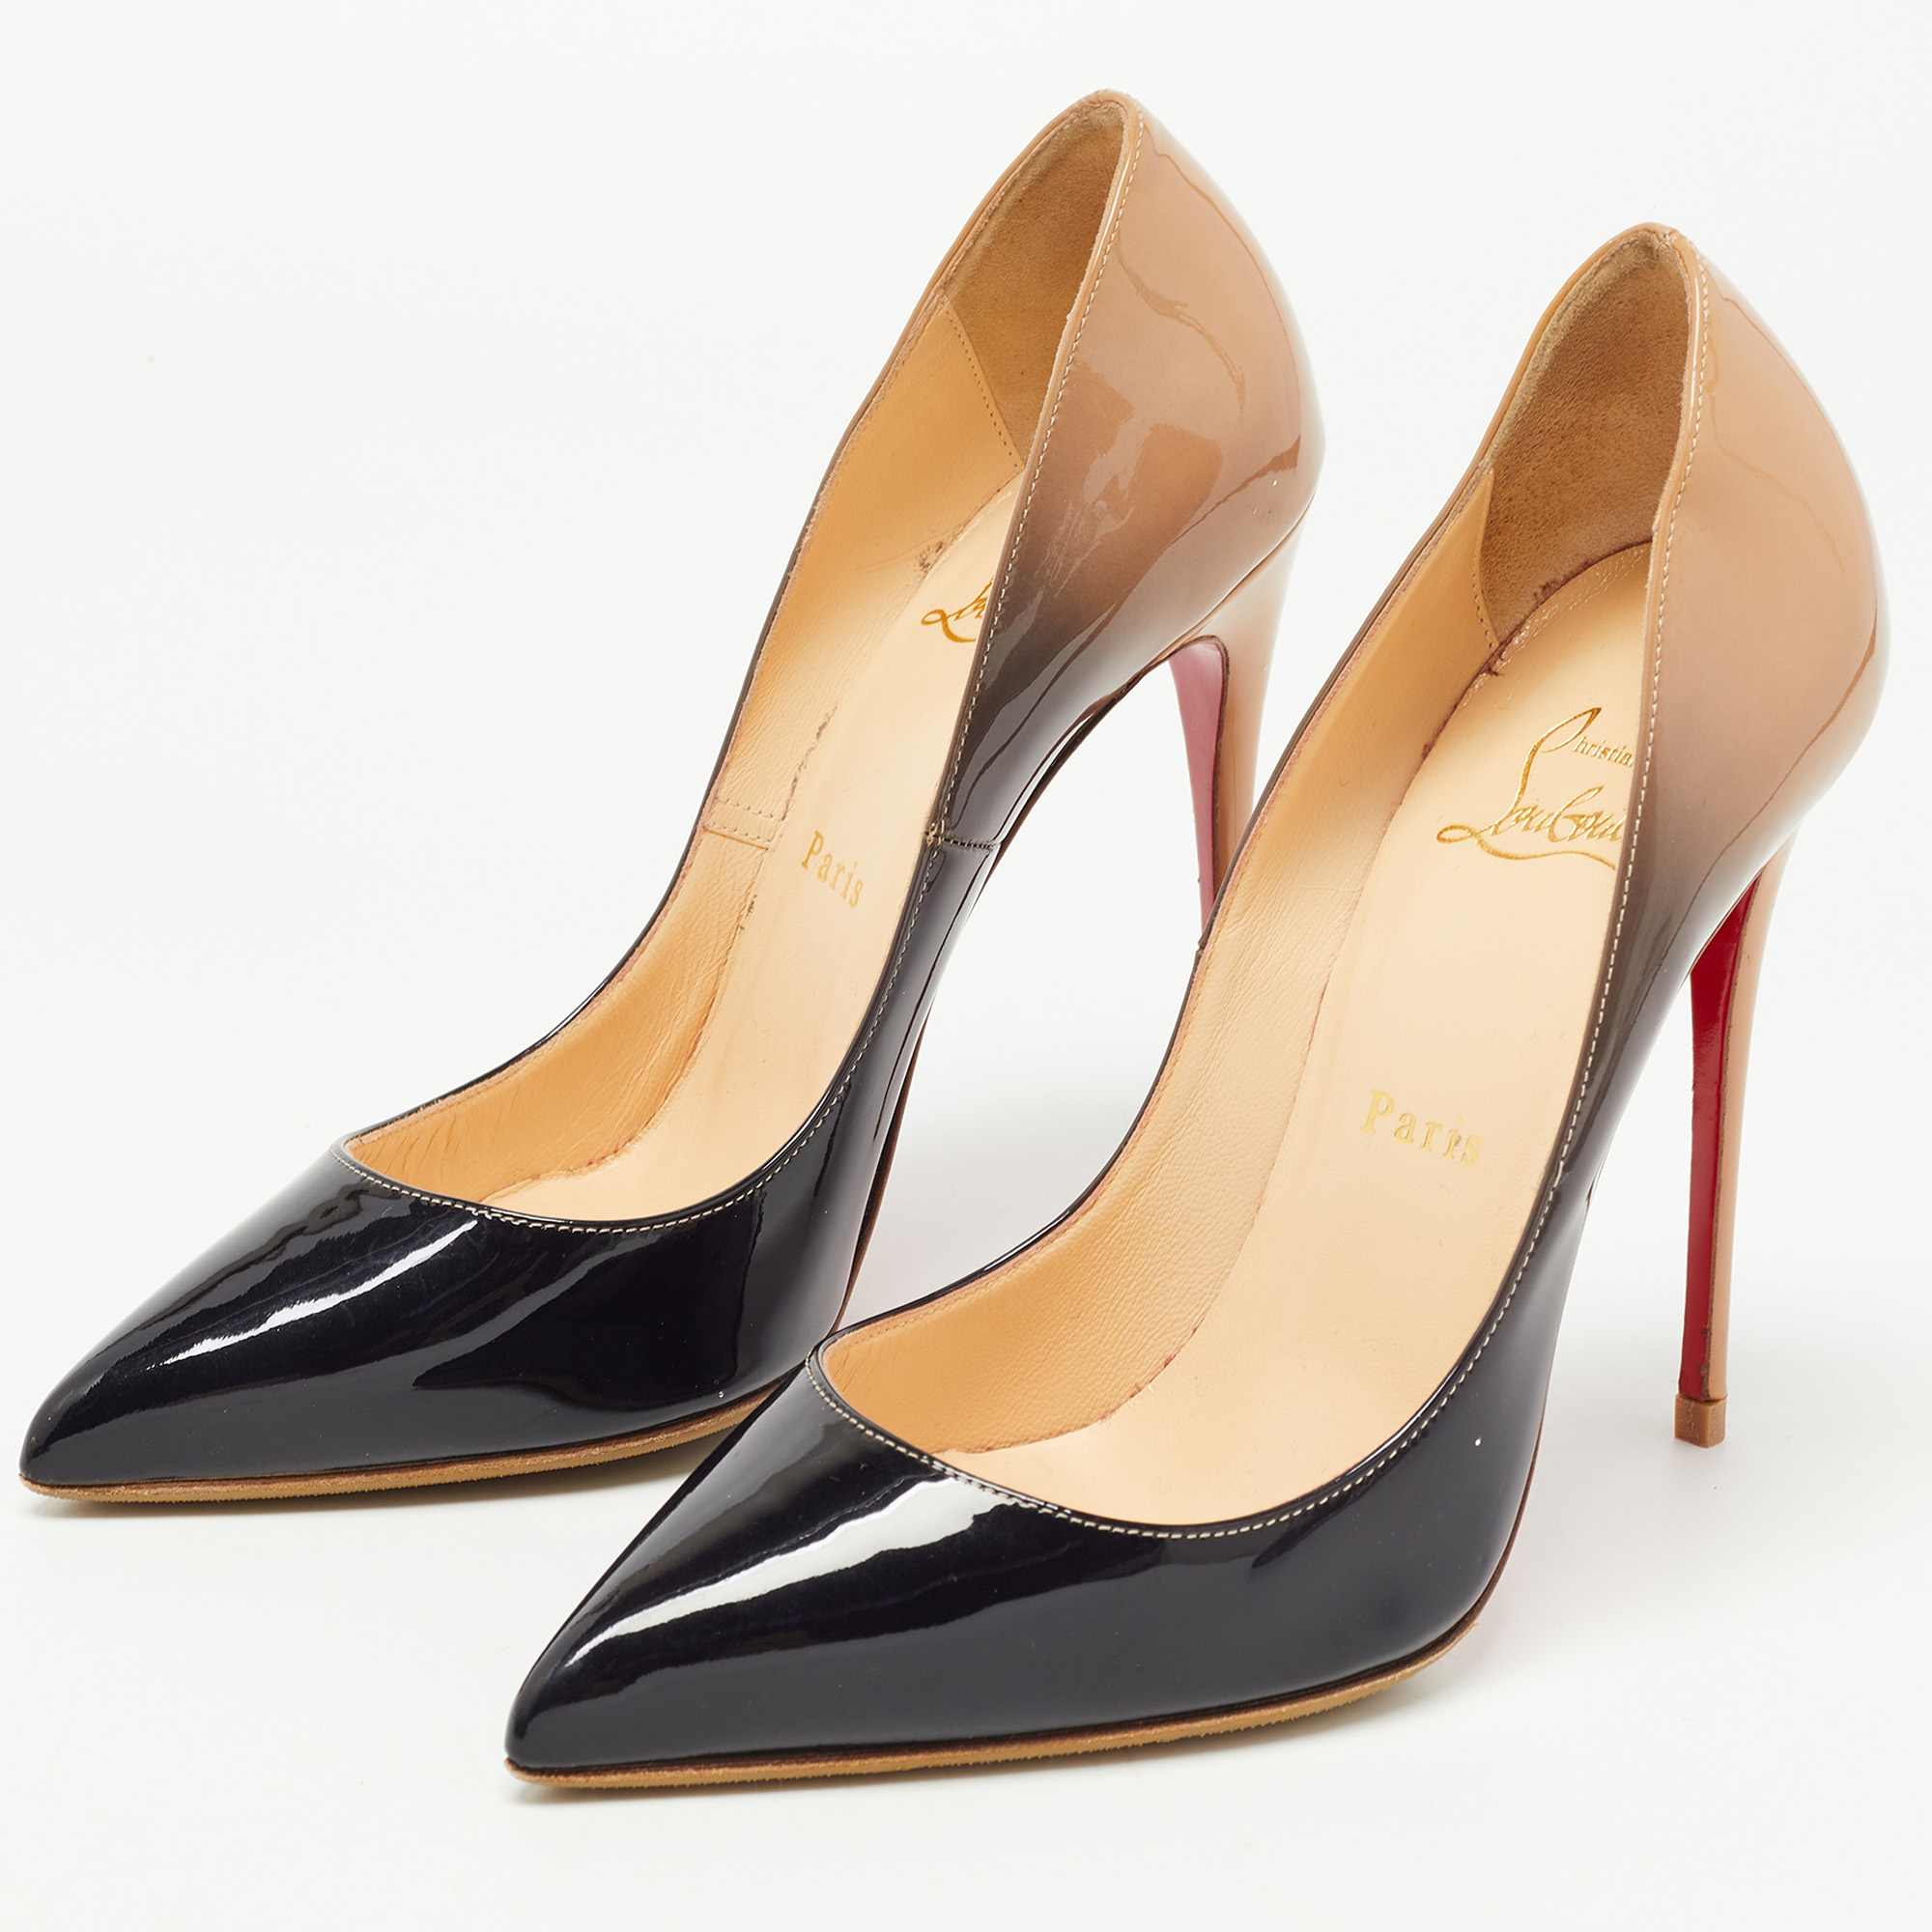 

Christian Louboutin Beige/Black Patent Leather Ombre So Kate Pumps Size